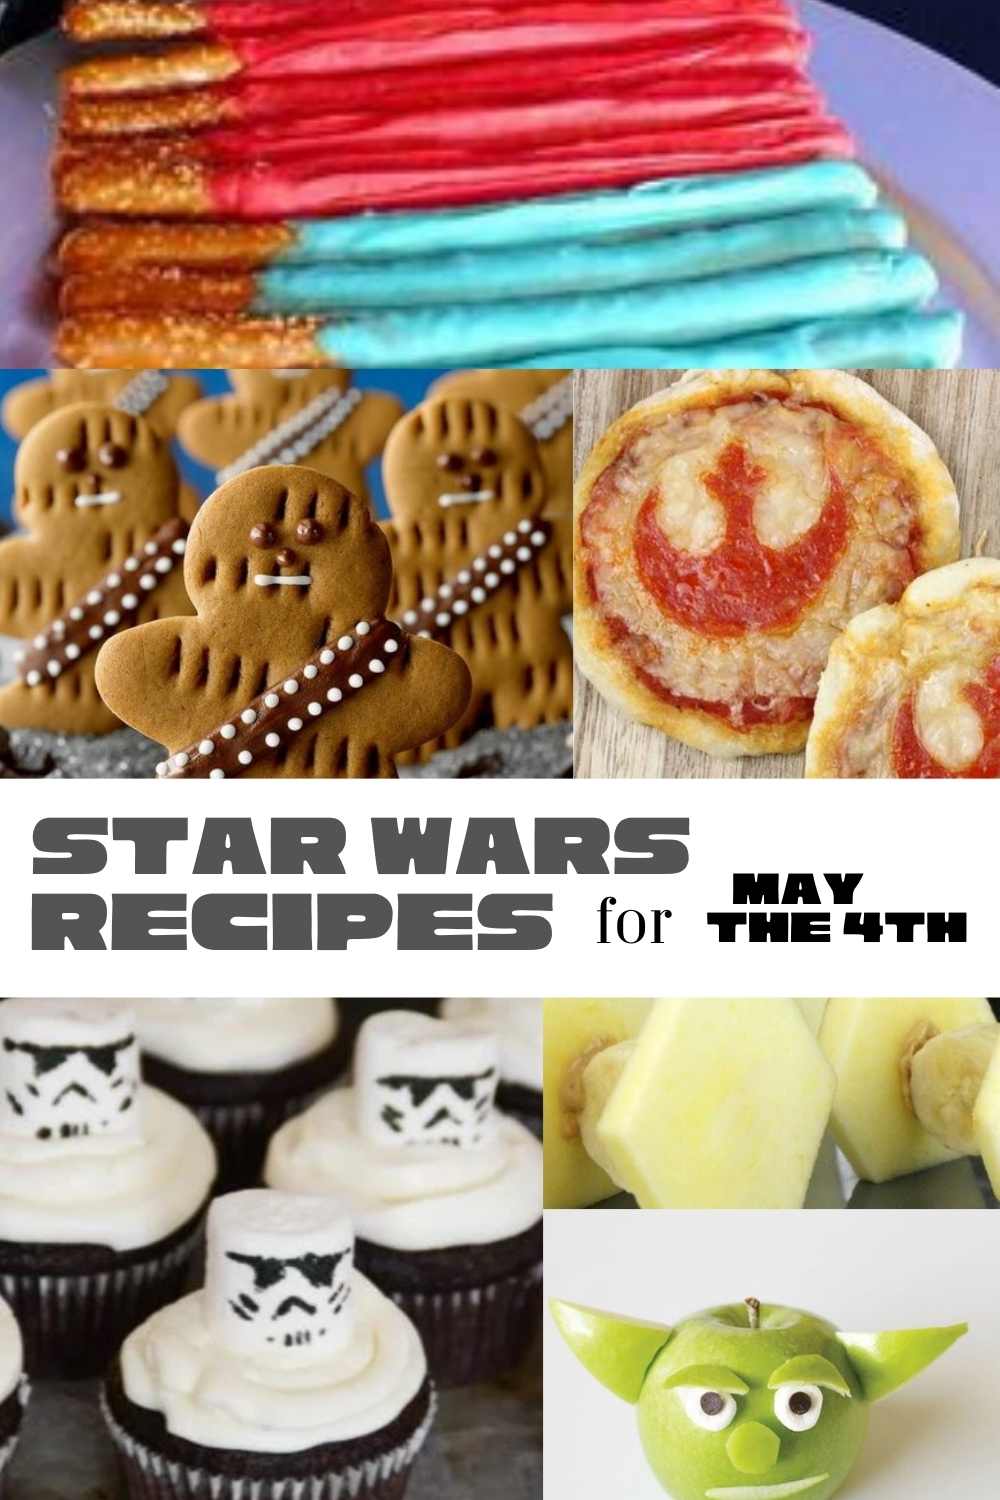 Star Wars Recipes for May the 4th!